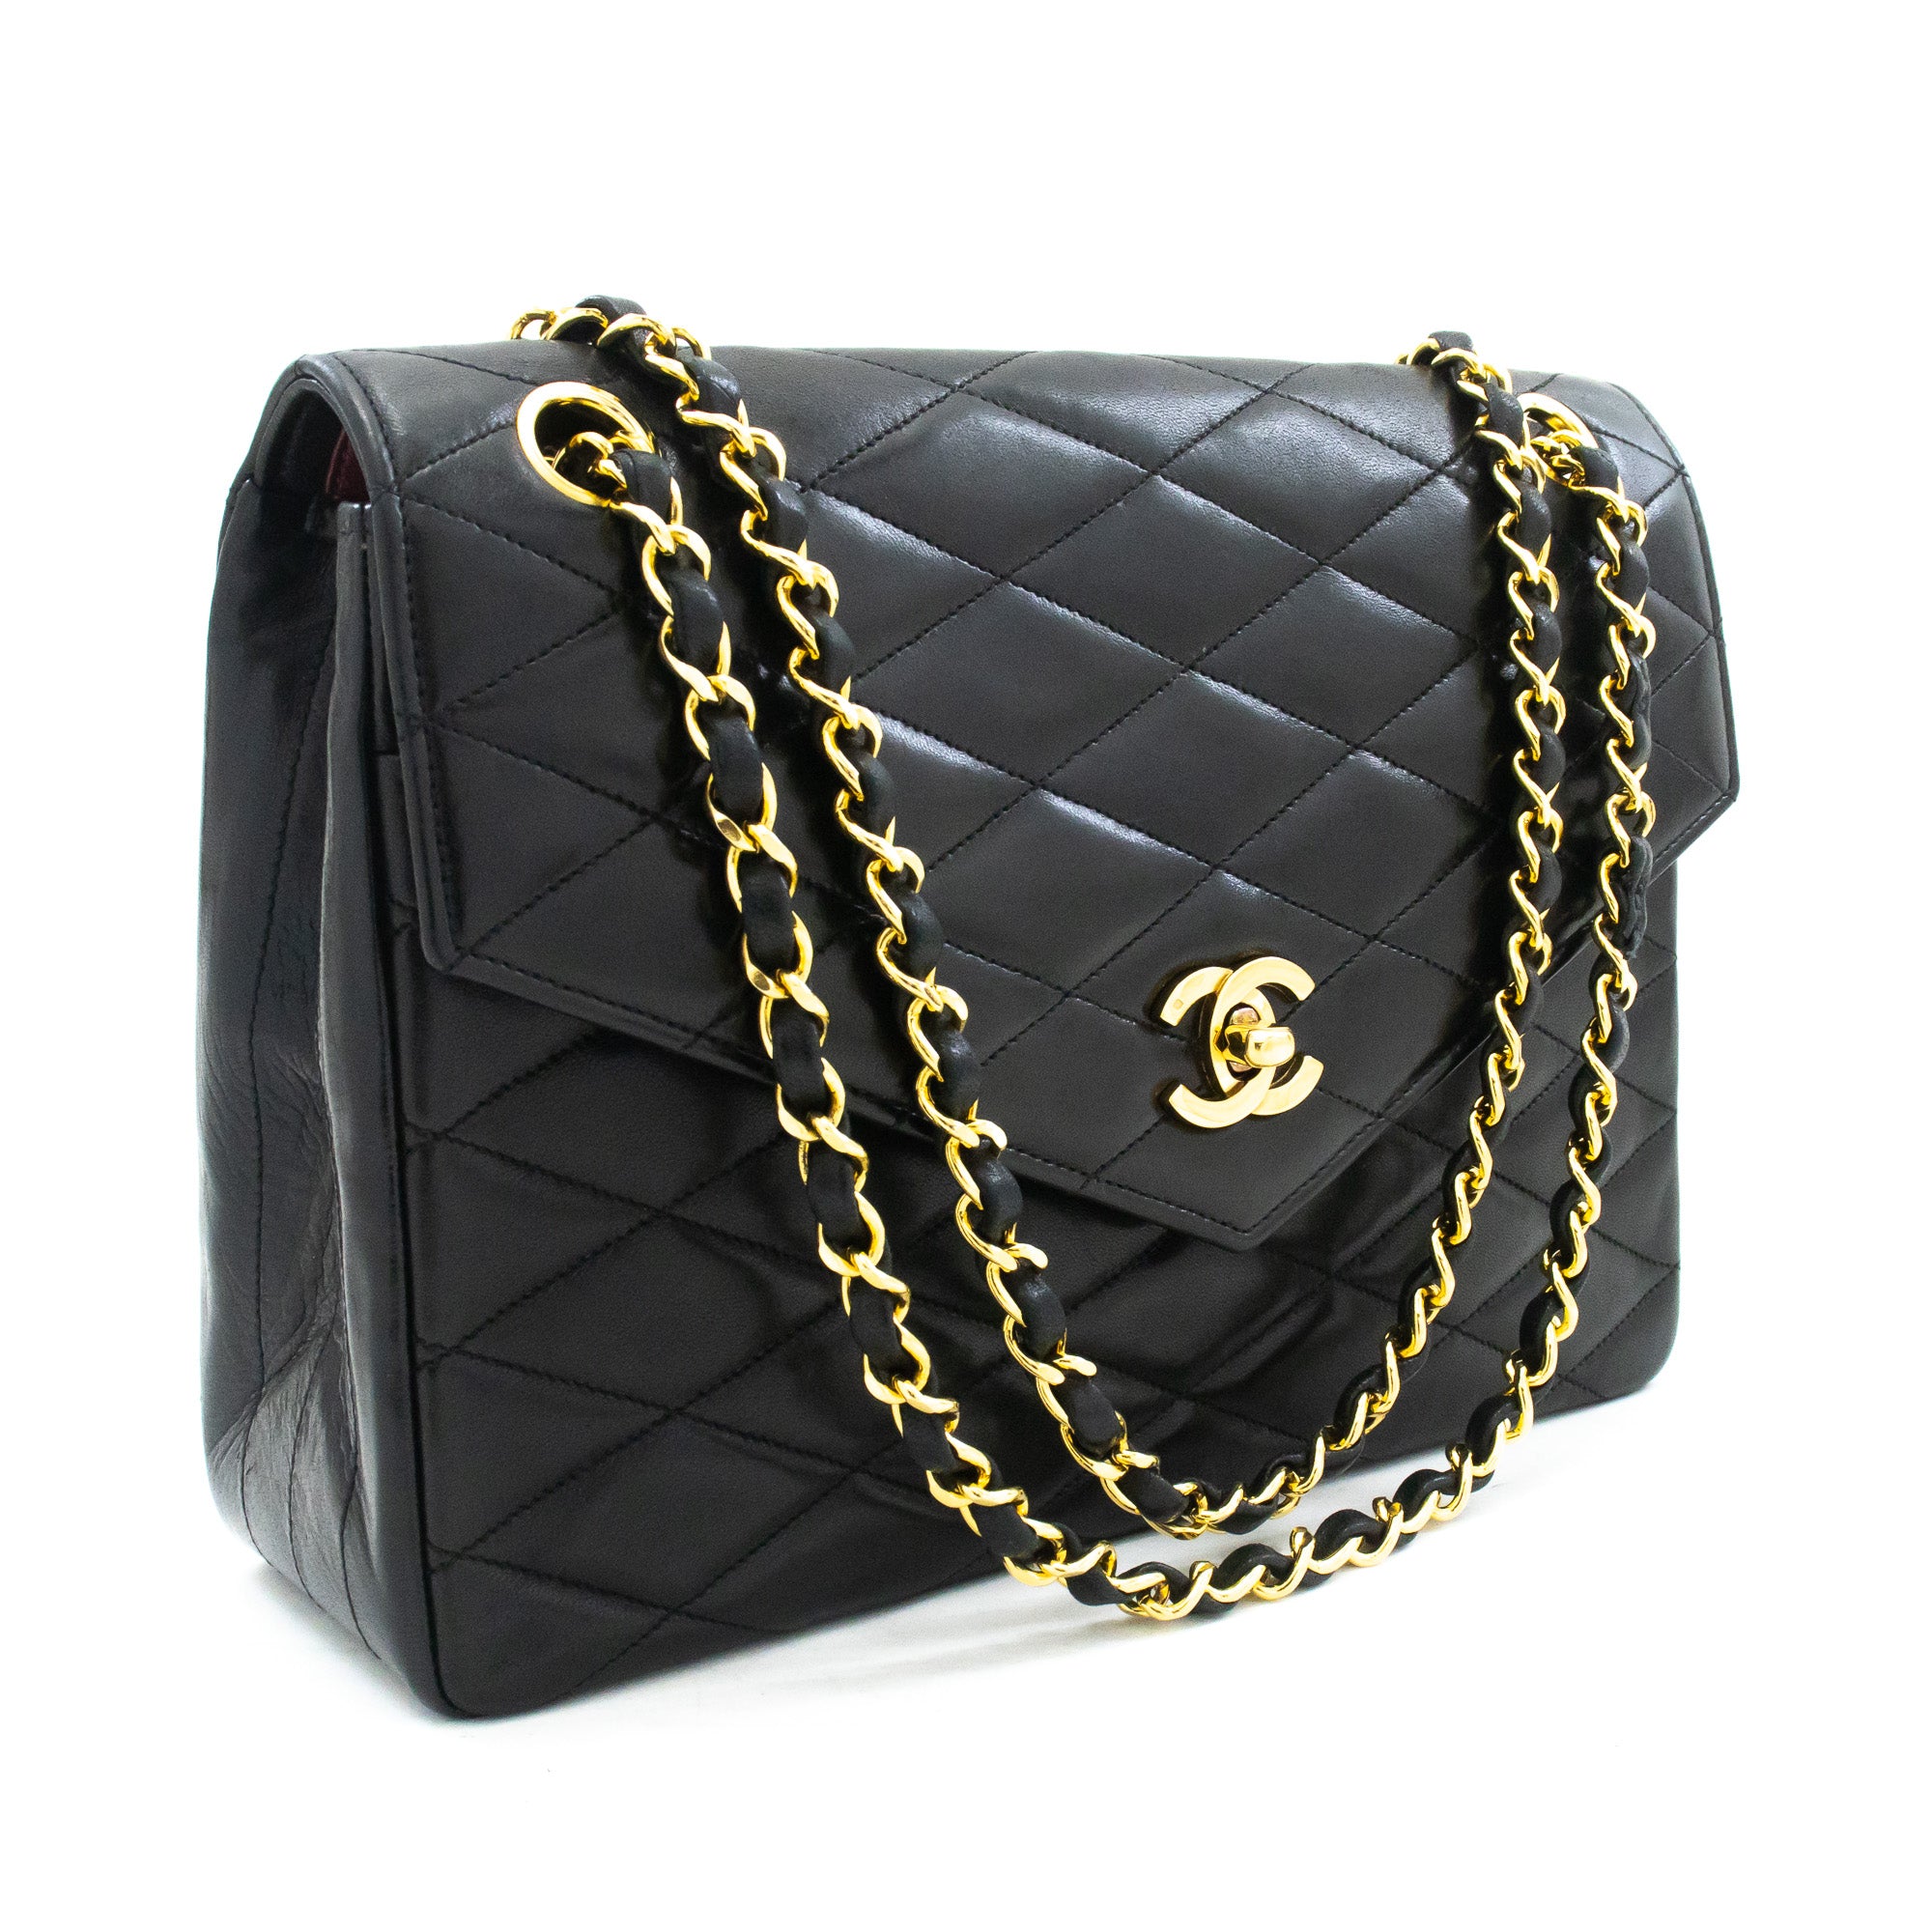 chanel large leather tote bag